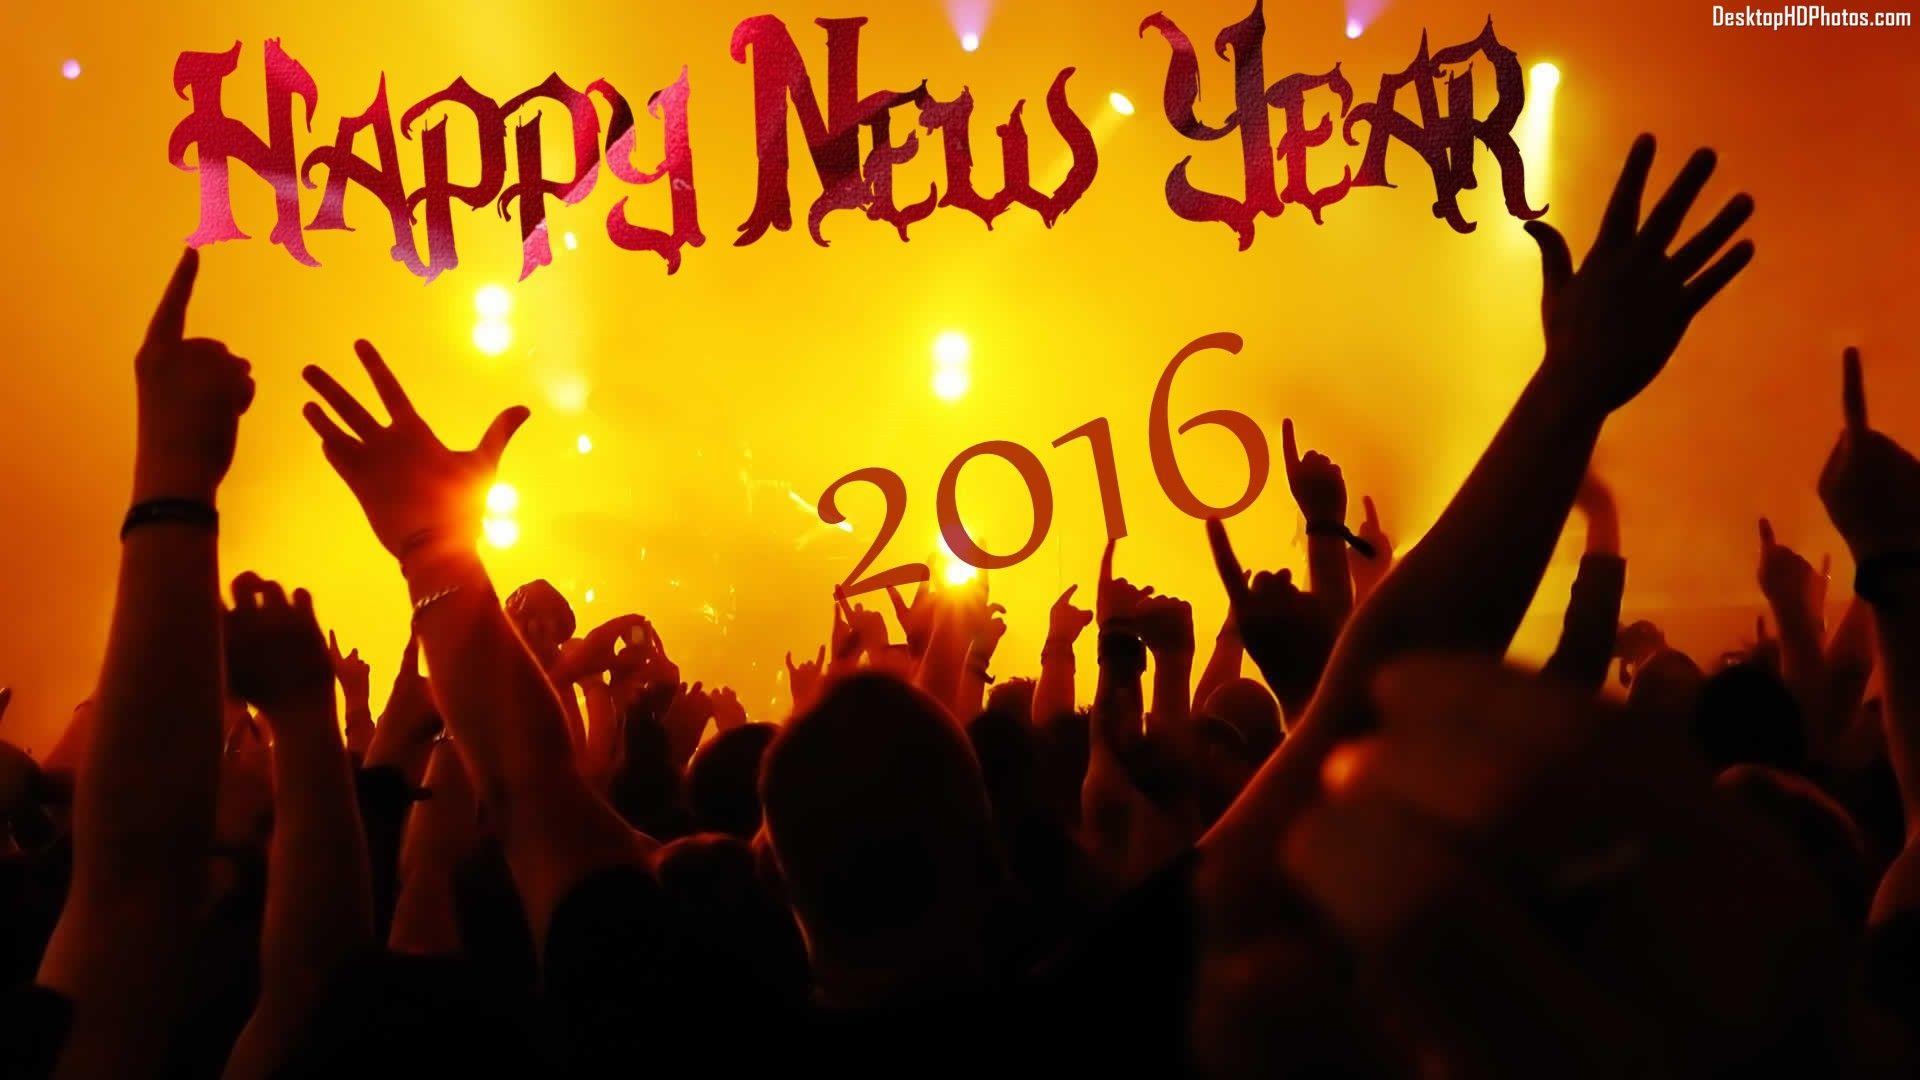 Most Beautiful New Year 2016 Wallpaper. Full HD Picture